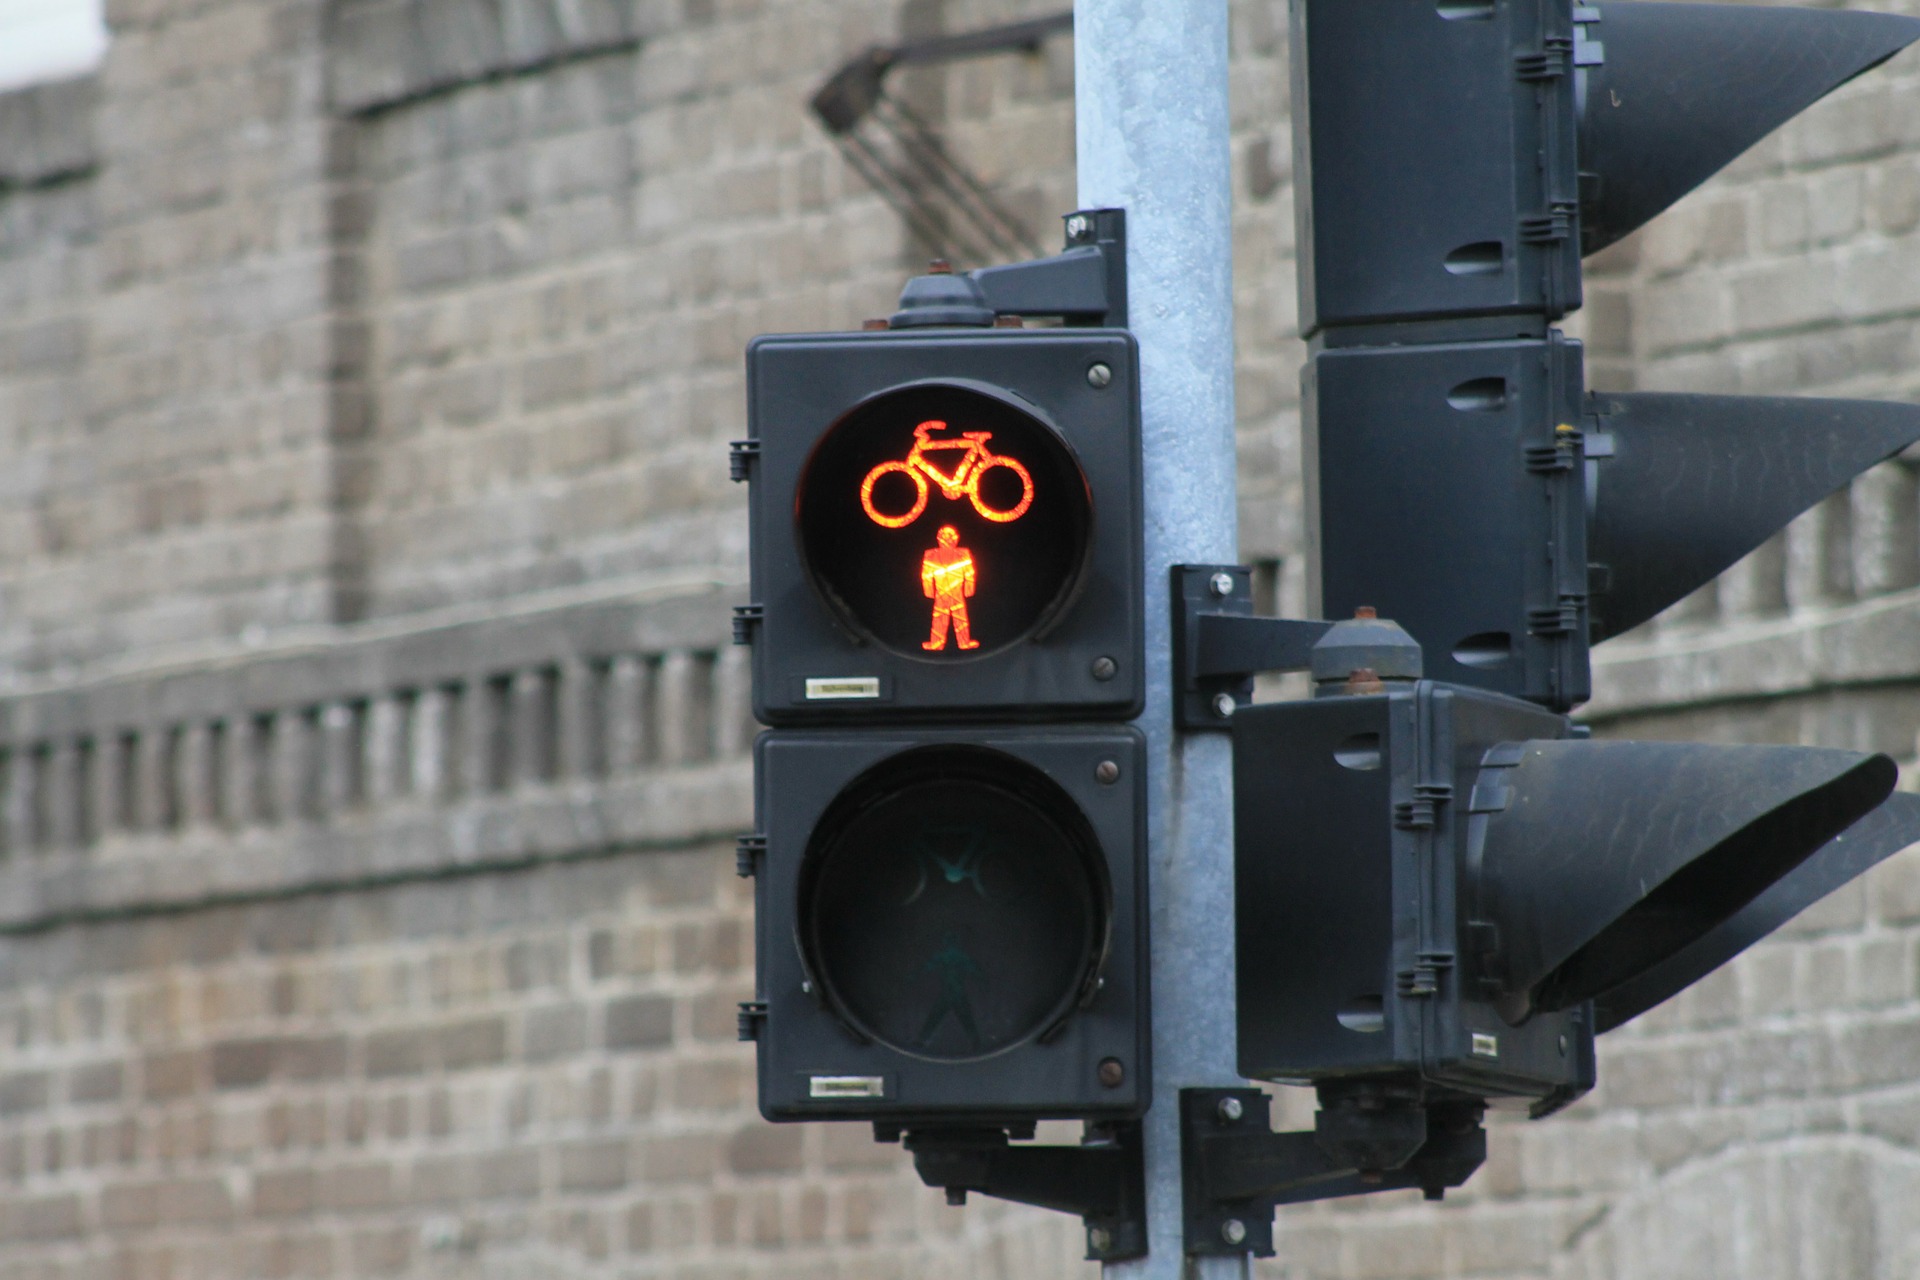 Pedestrian and bicycle traffic light